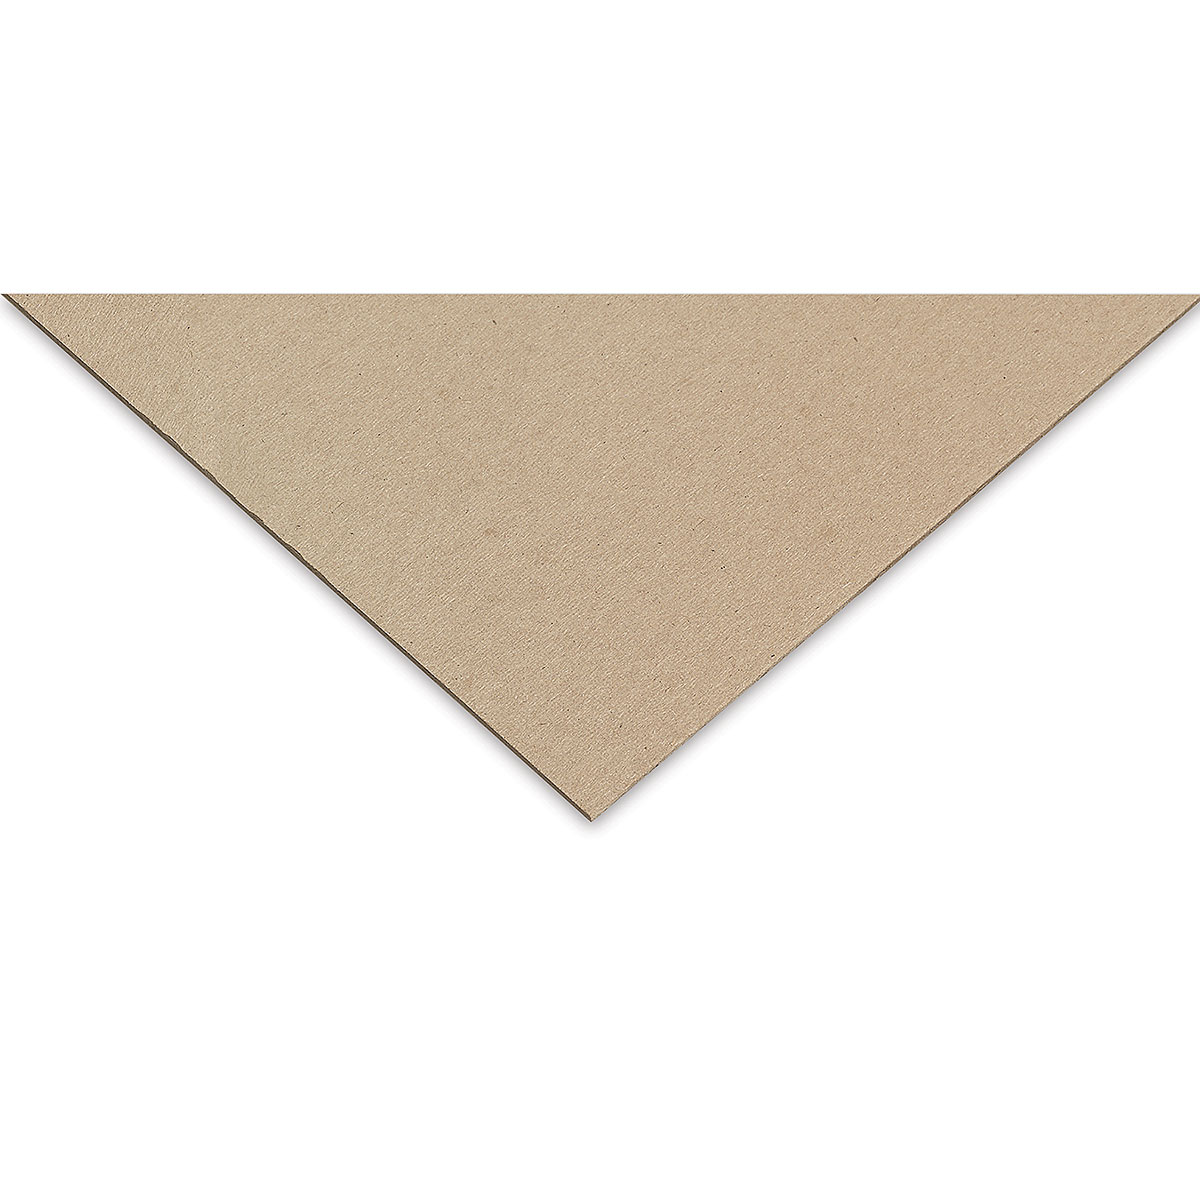 6x9 Thick Chipboard Squares, 32pt 1.27 mm Thick Chipboard, Recycled Ch